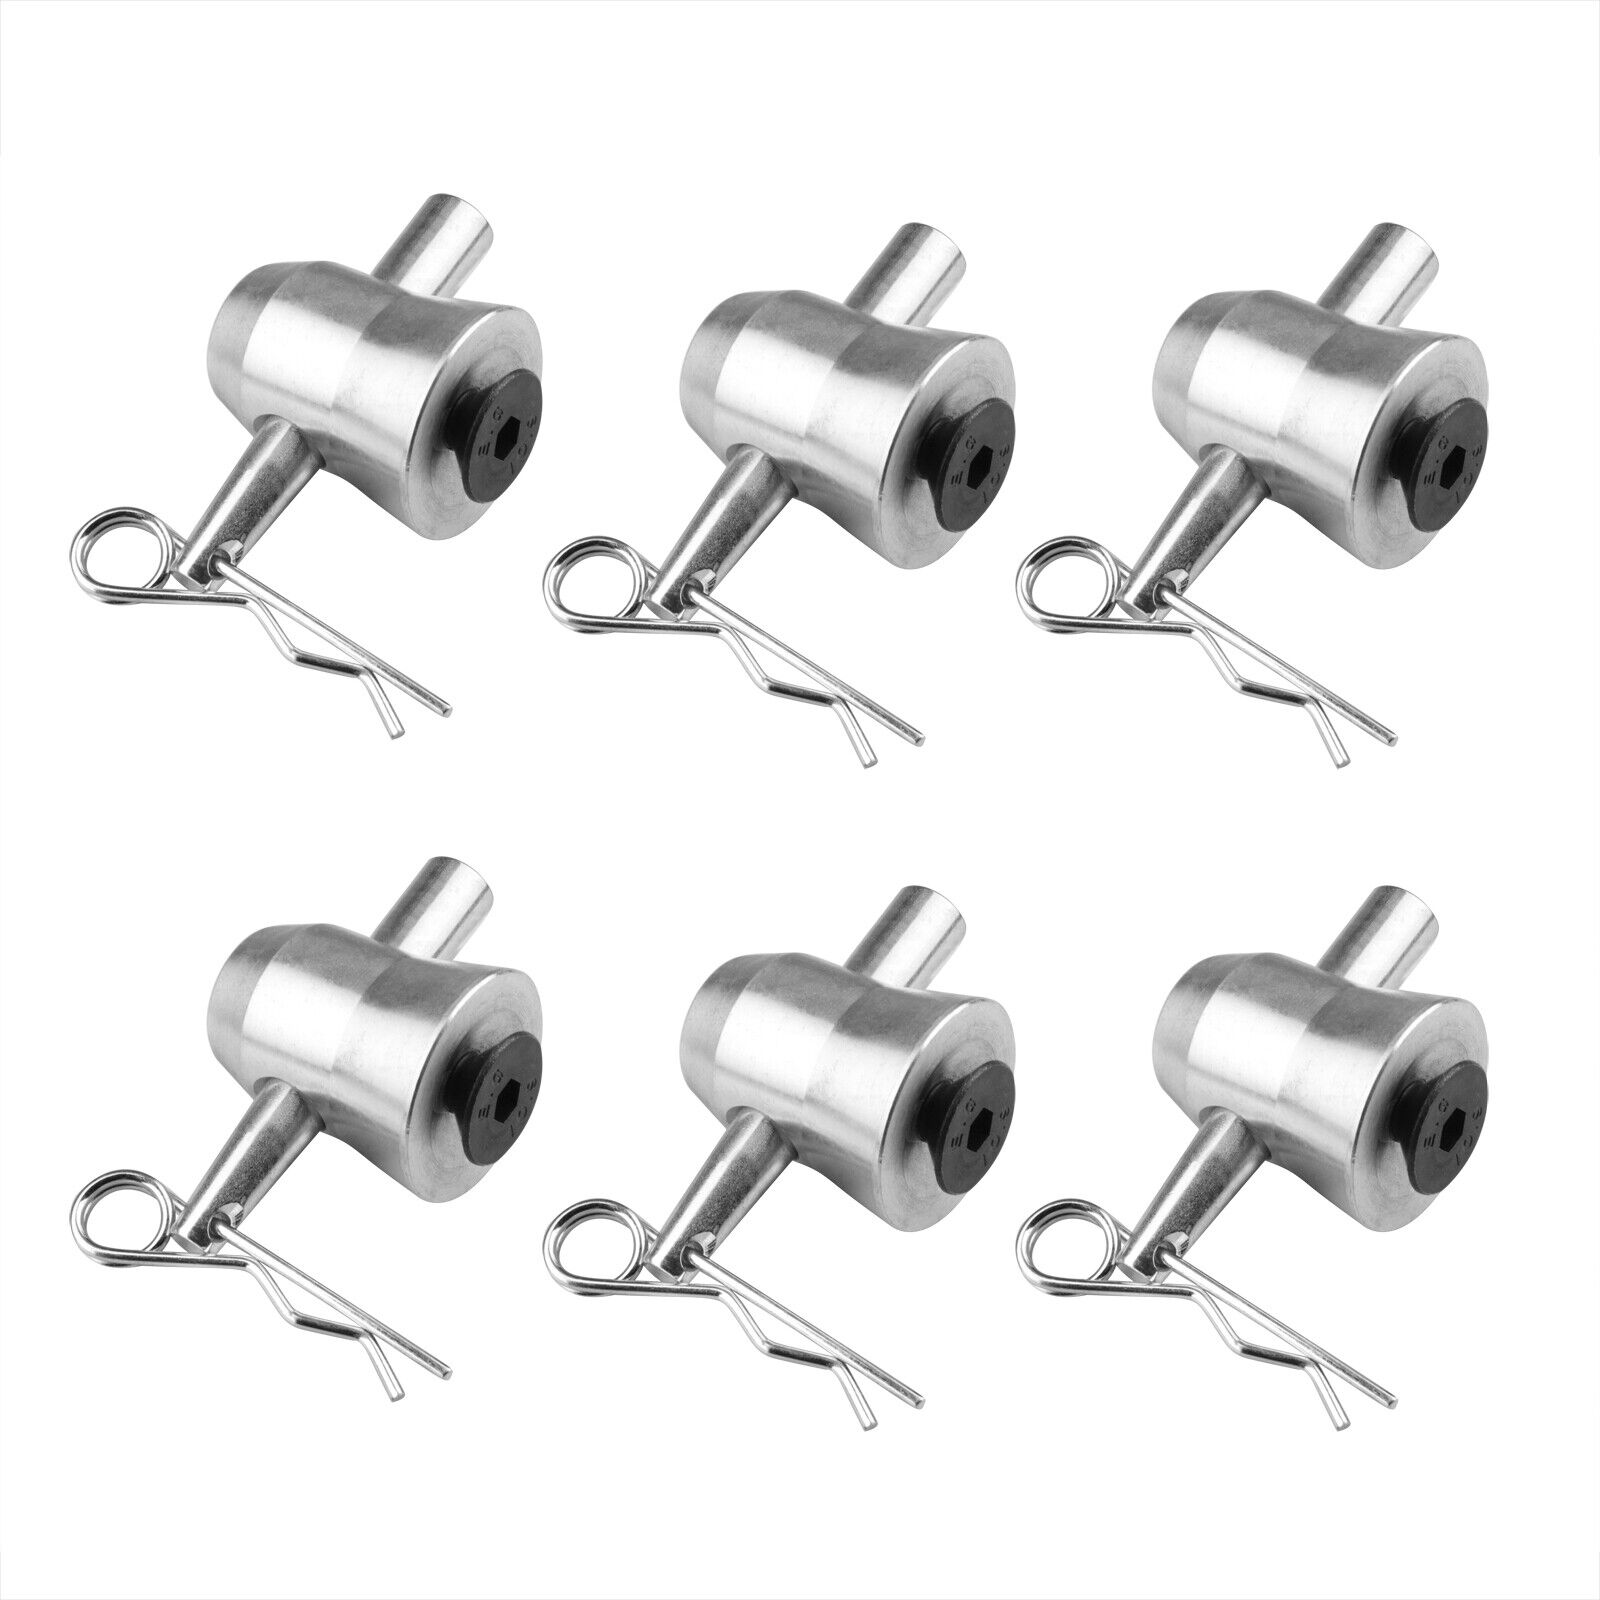 6Pcs Aluminum Half Conical Coupler with Clips Pins for Stage Truss Fit F34 F33 Unbranded Does not apply